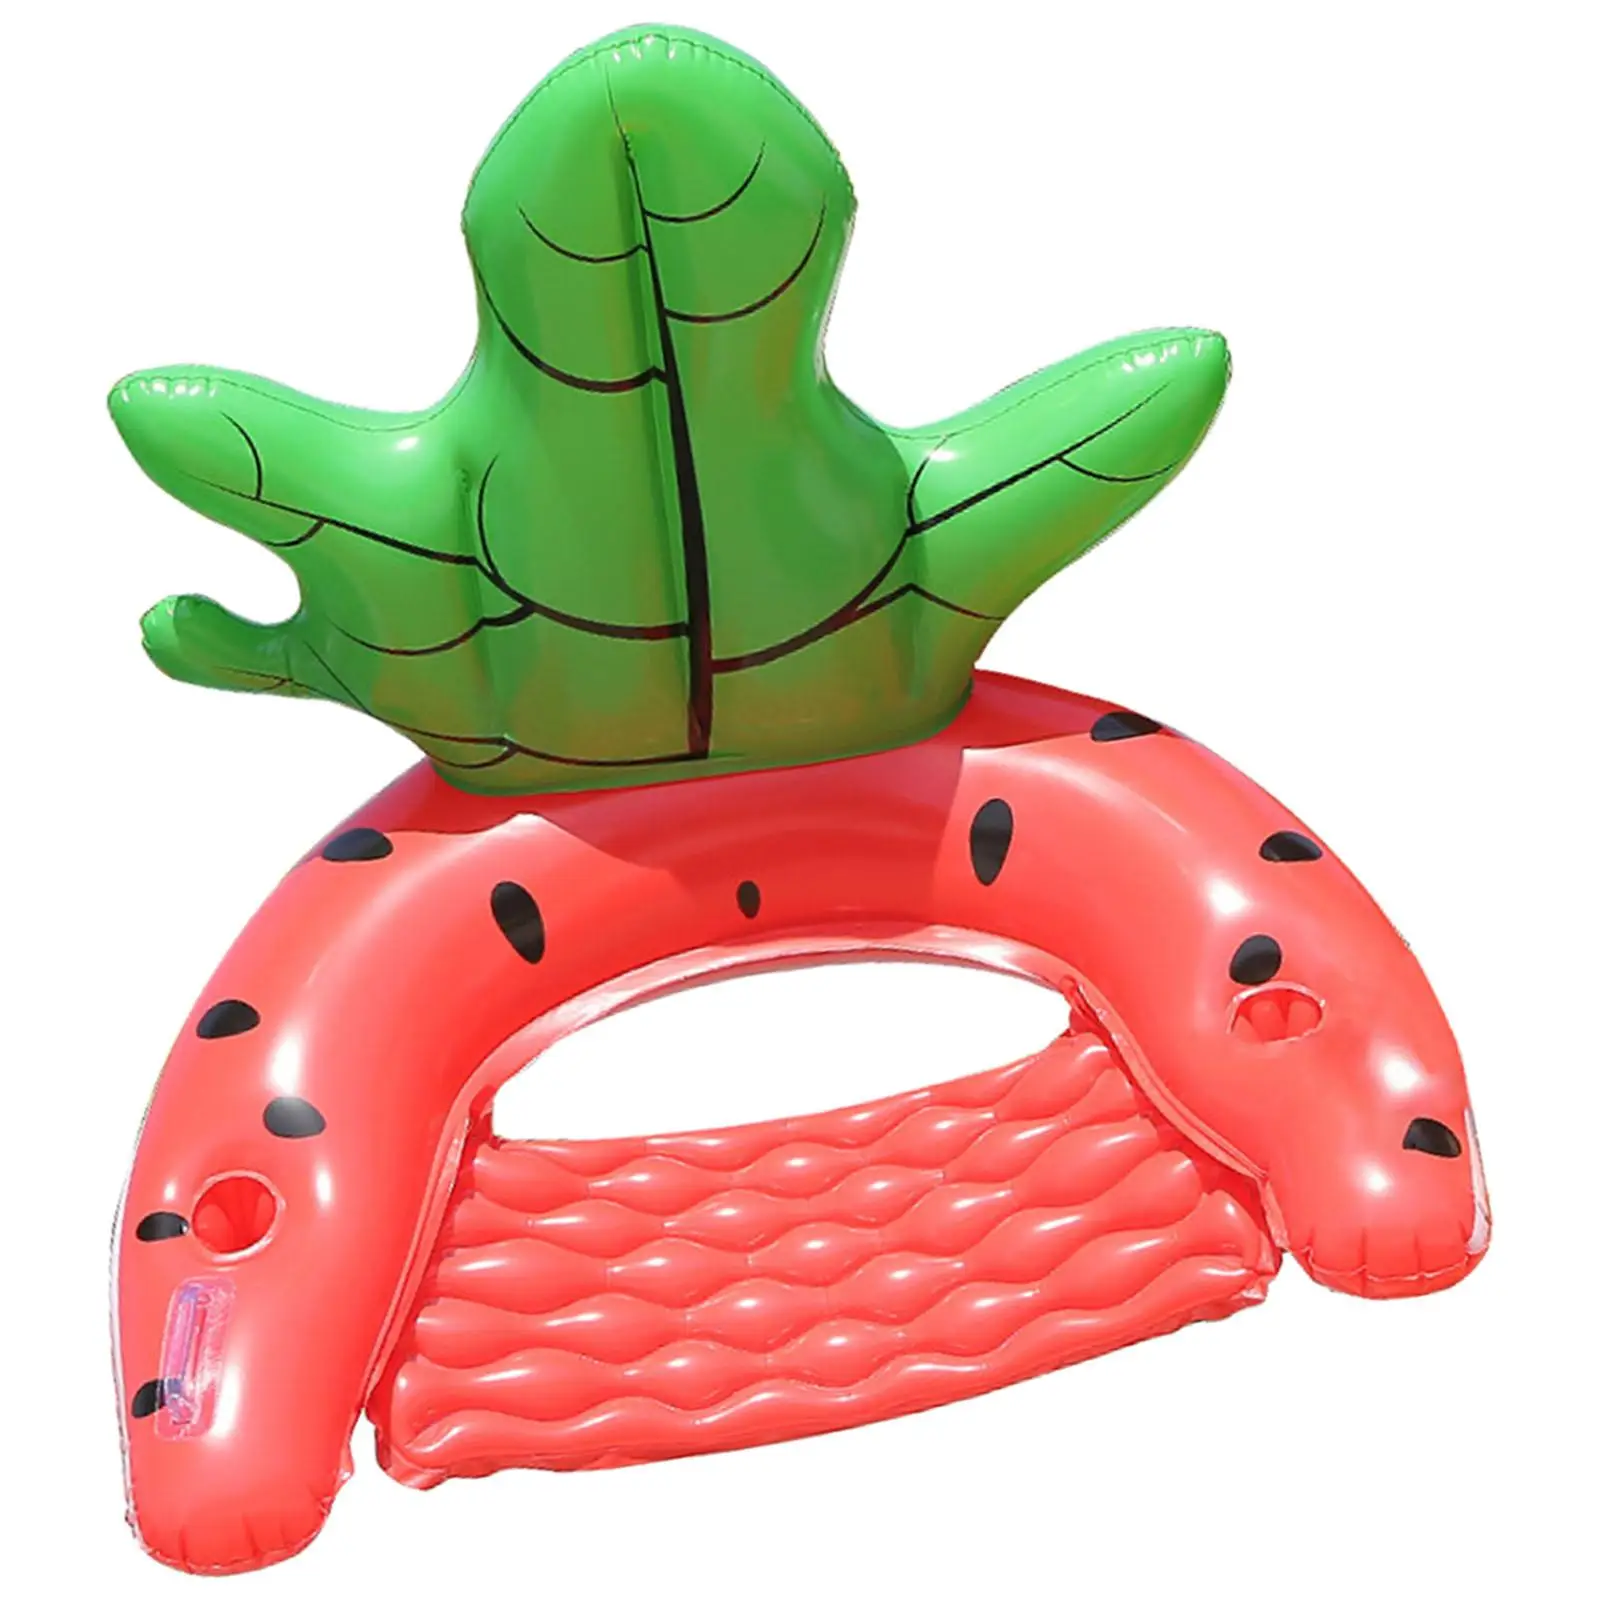 Watermelon Inflatable Pool Float Water Hammock Float with Handles Beach Float Chair Lake Raft for Pool Outdoor Party Beach